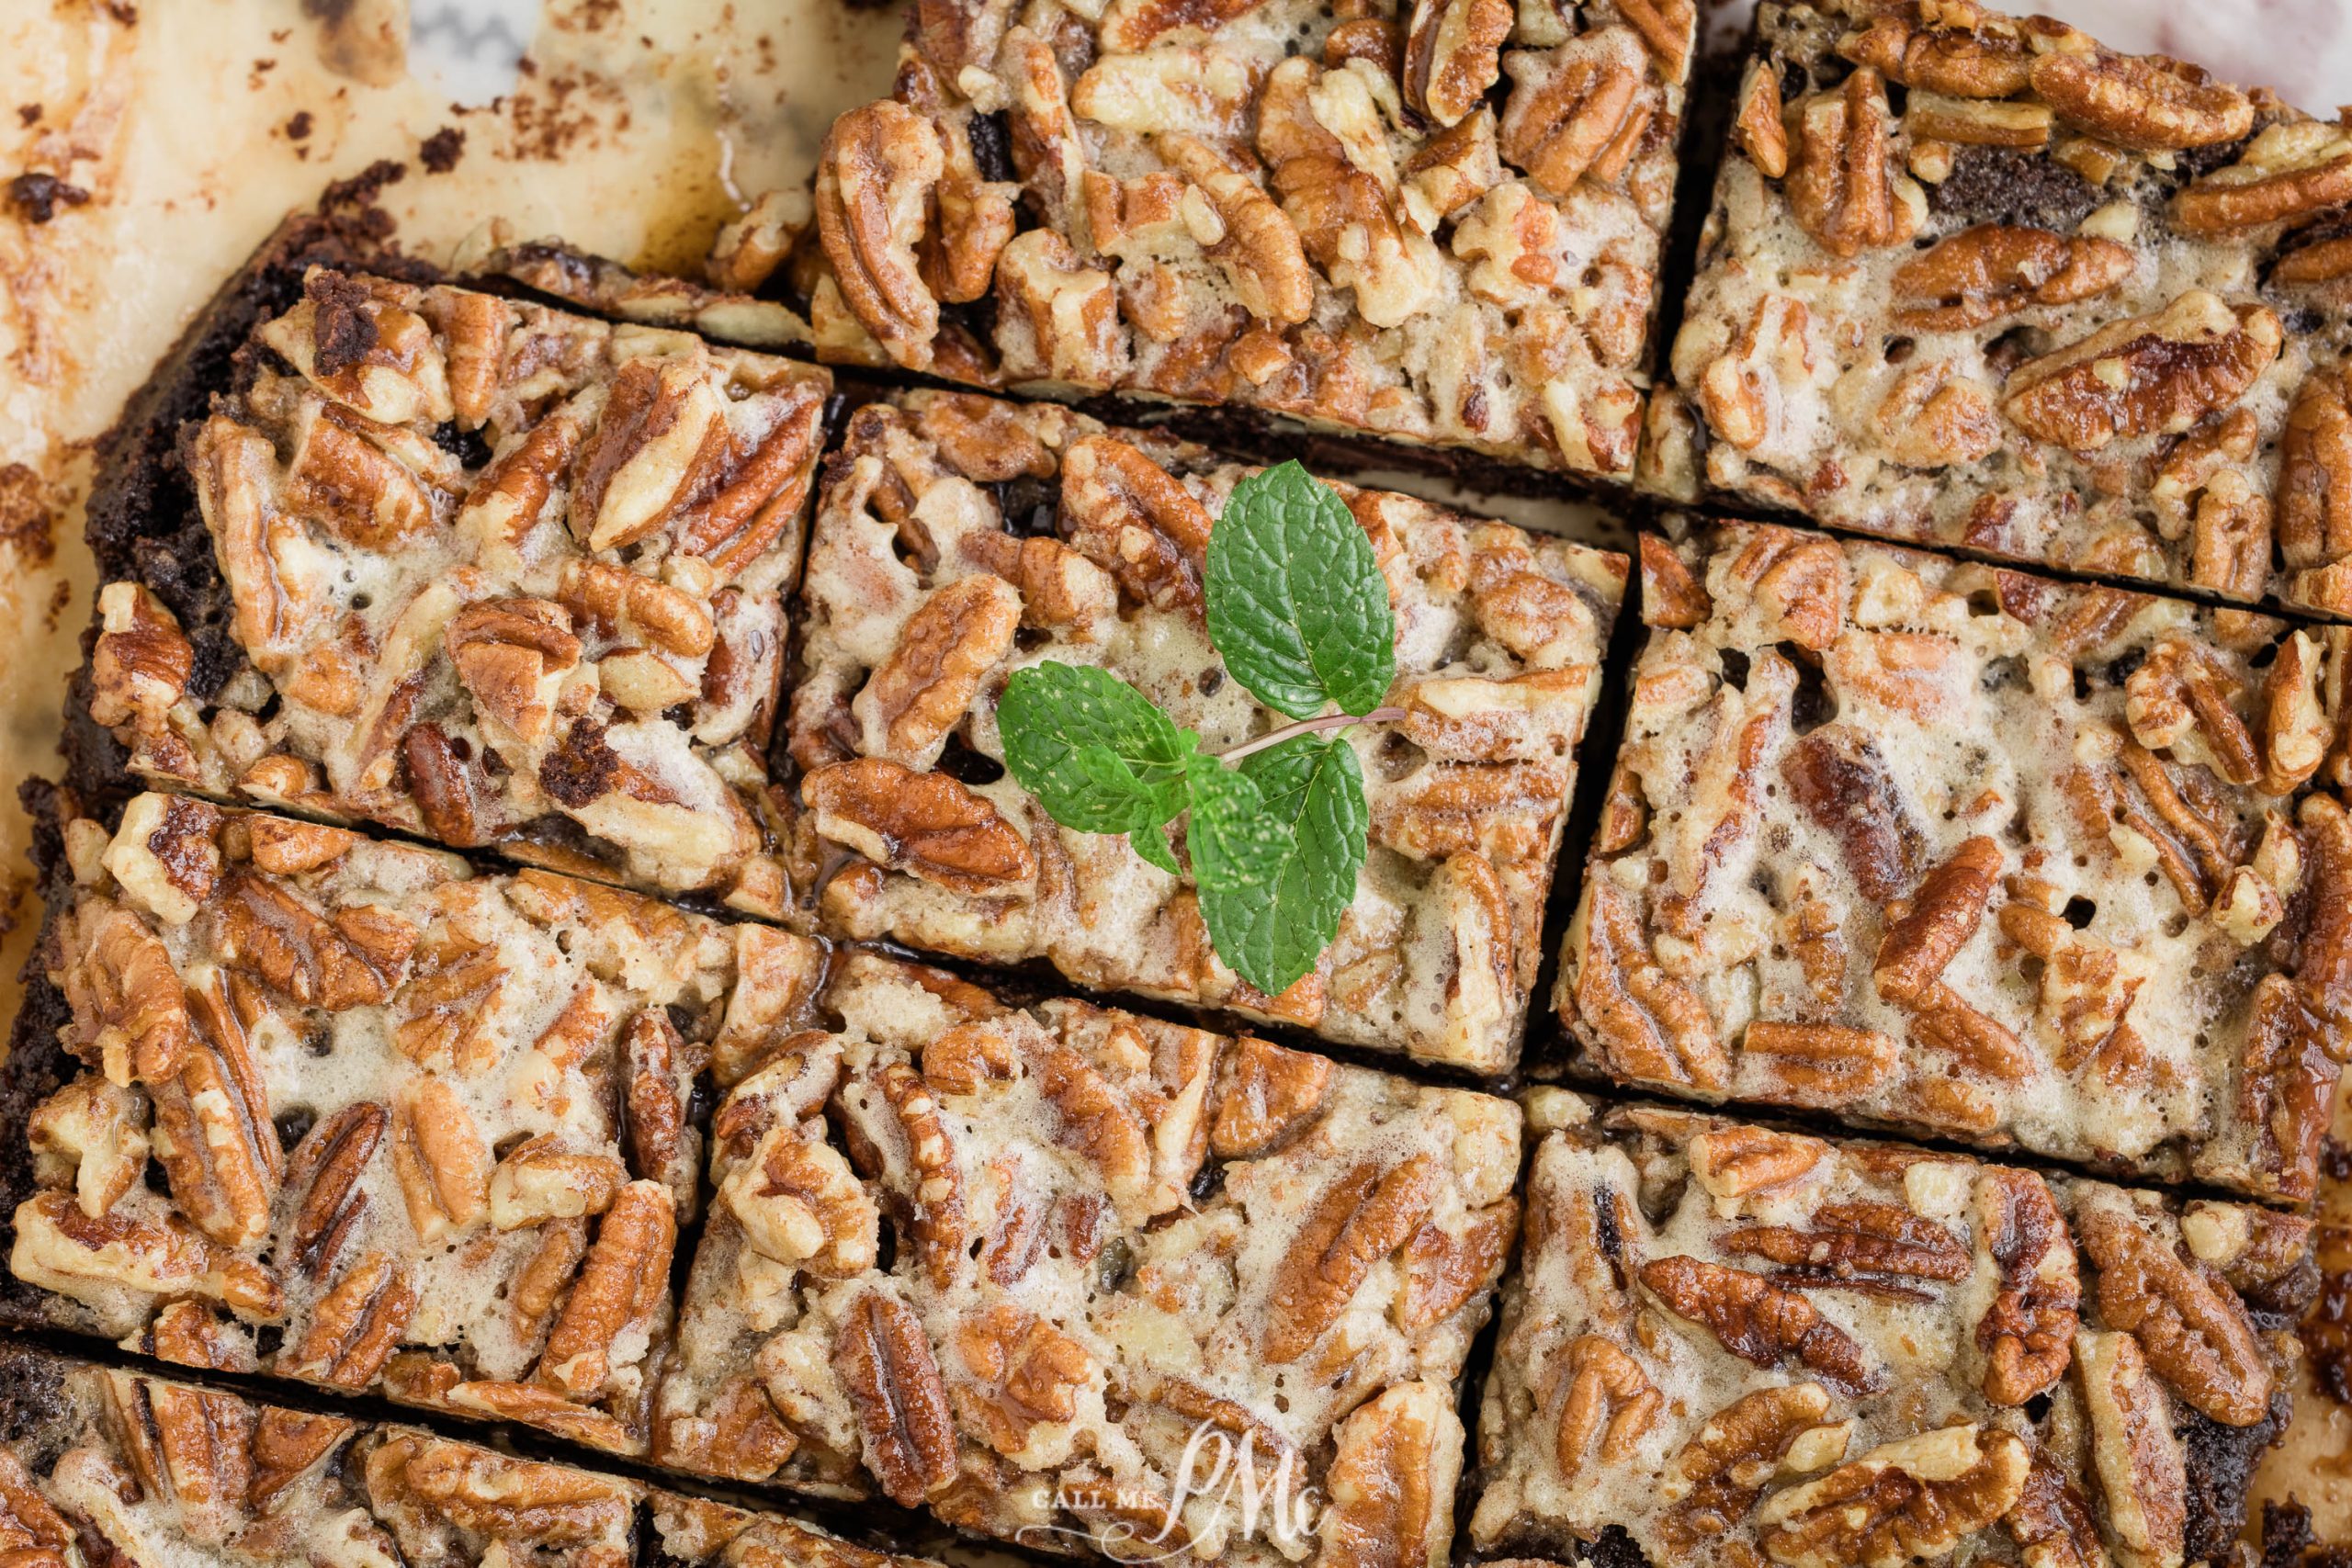 Chocolate pecan bars with mint sprigs.